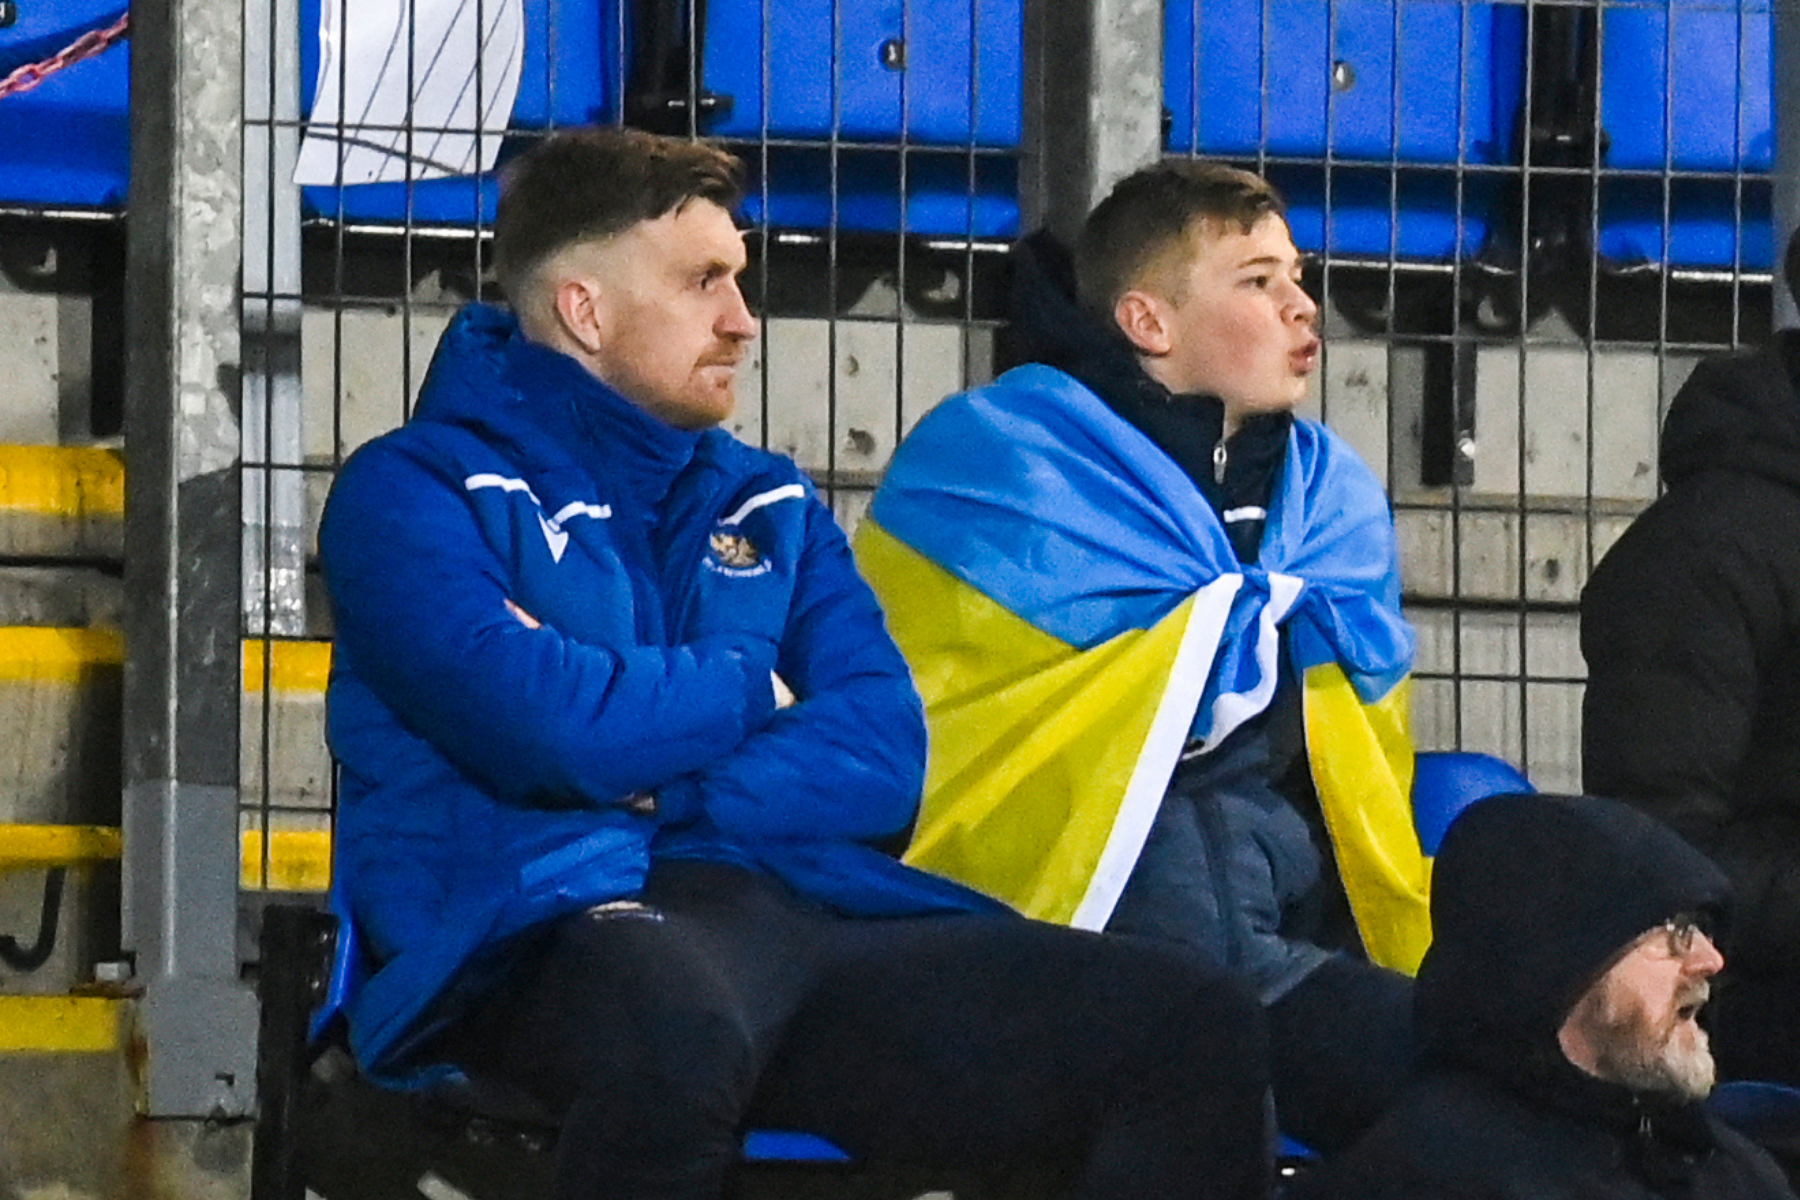 St Johnstone youngster Max Kucheriavyi bravely opens up on Ukraine horror and fear for friends and family back home